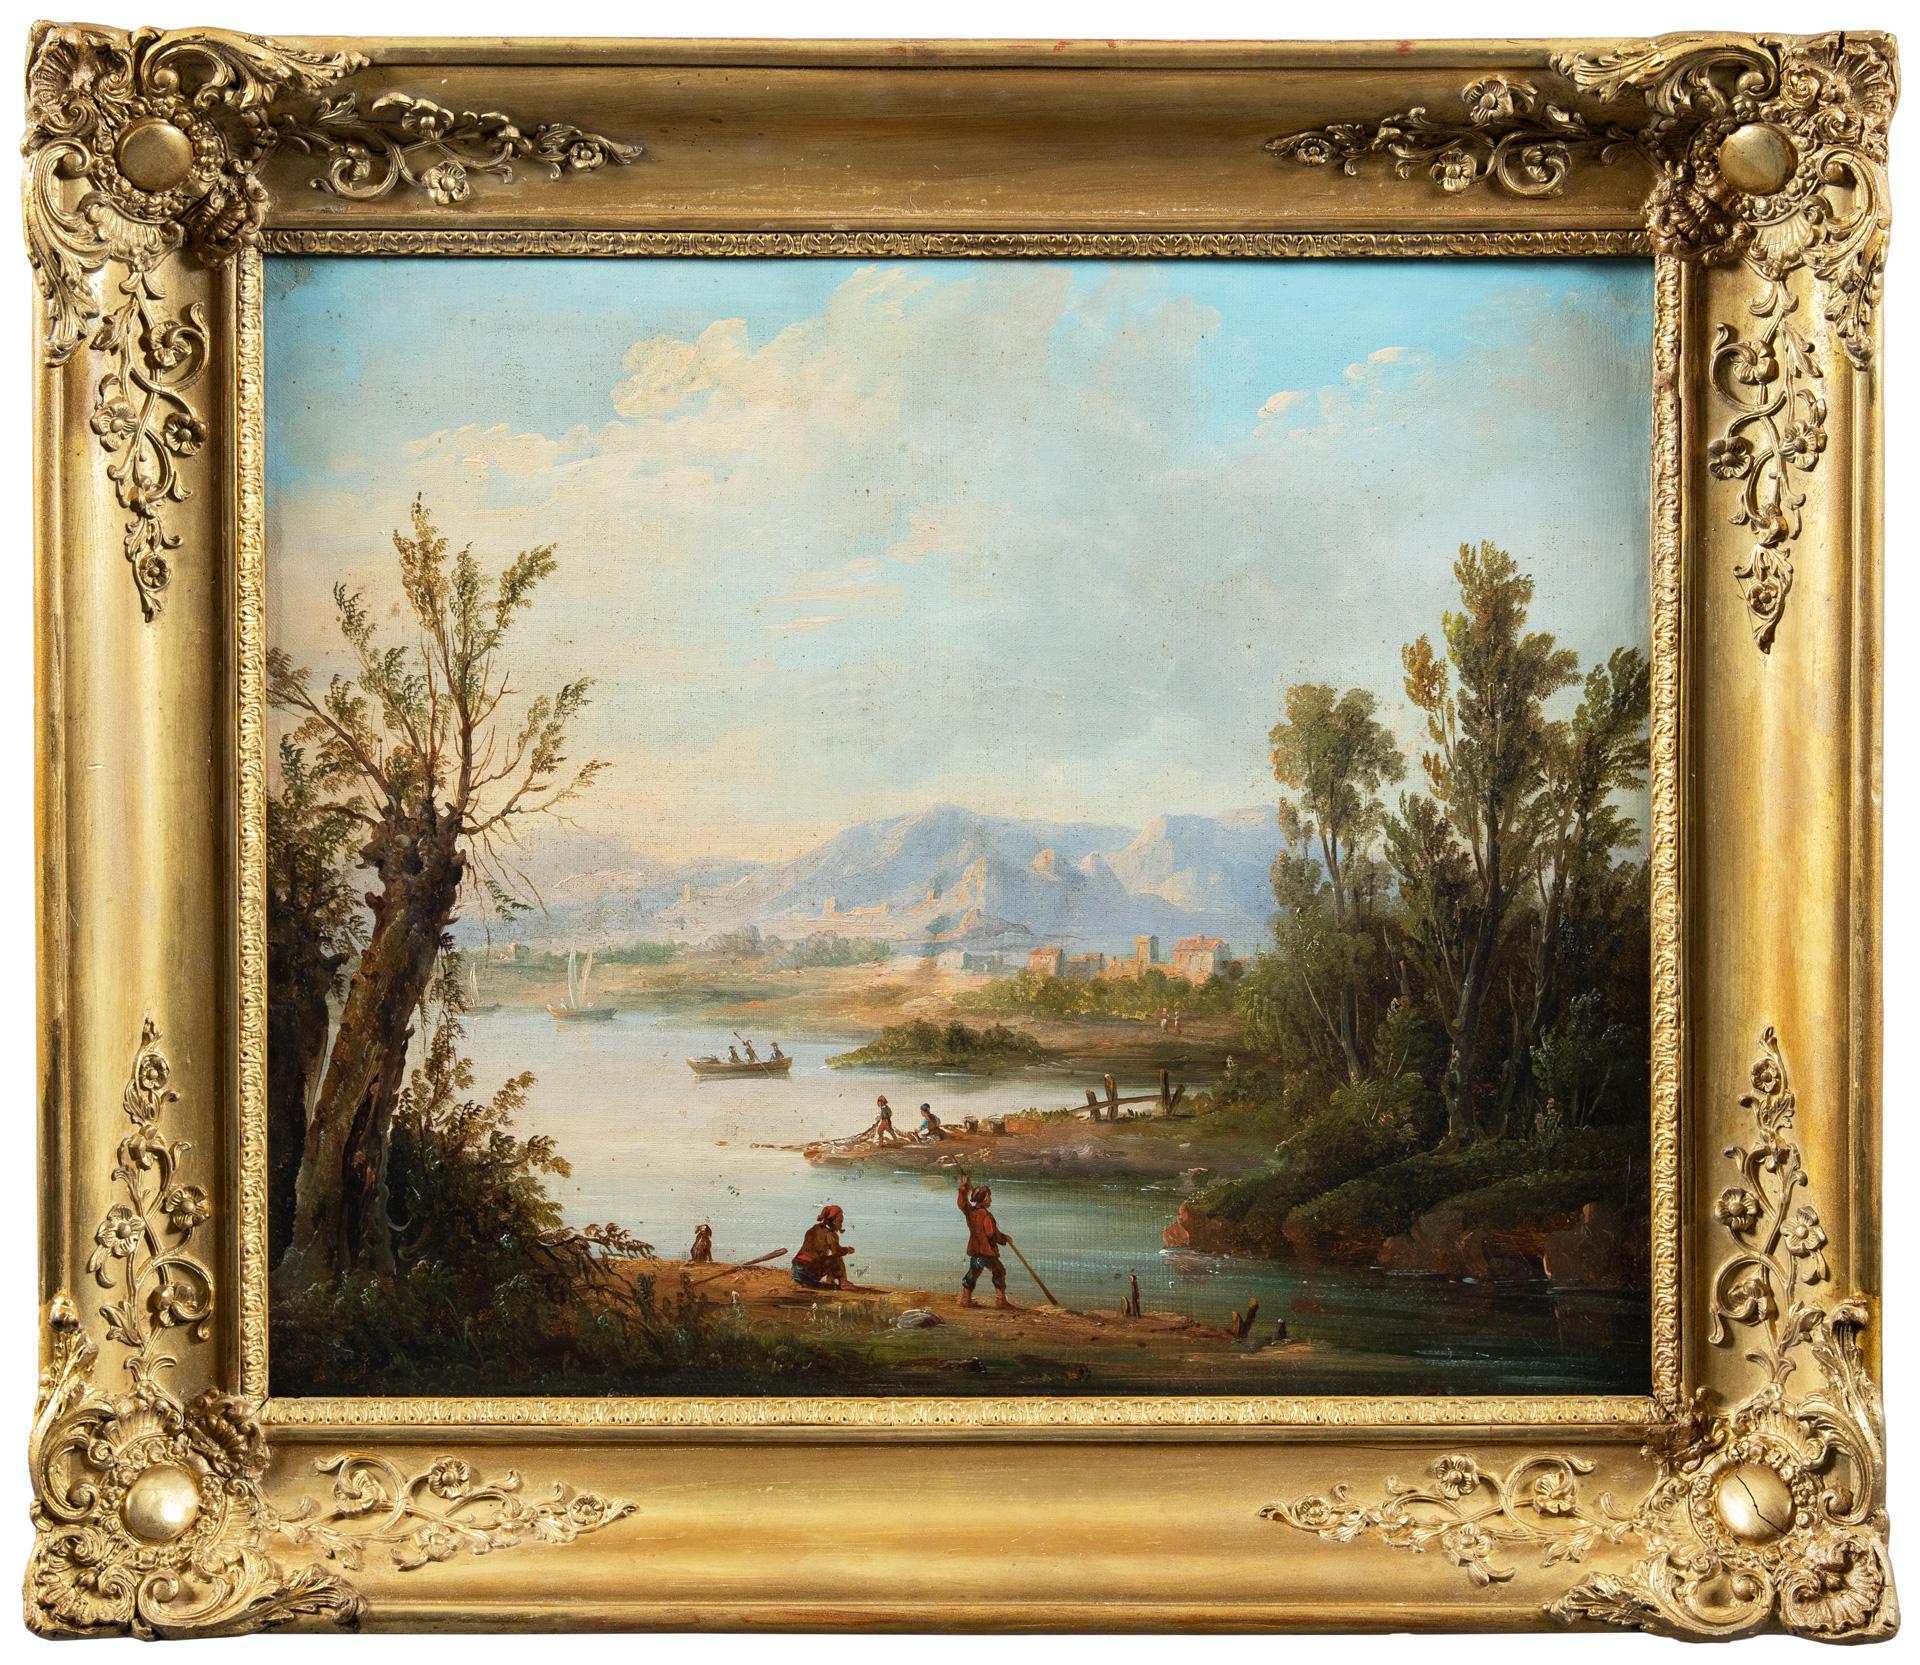 Early 19th century French landscape painting - Port Scene - Oil on canvas Vernet